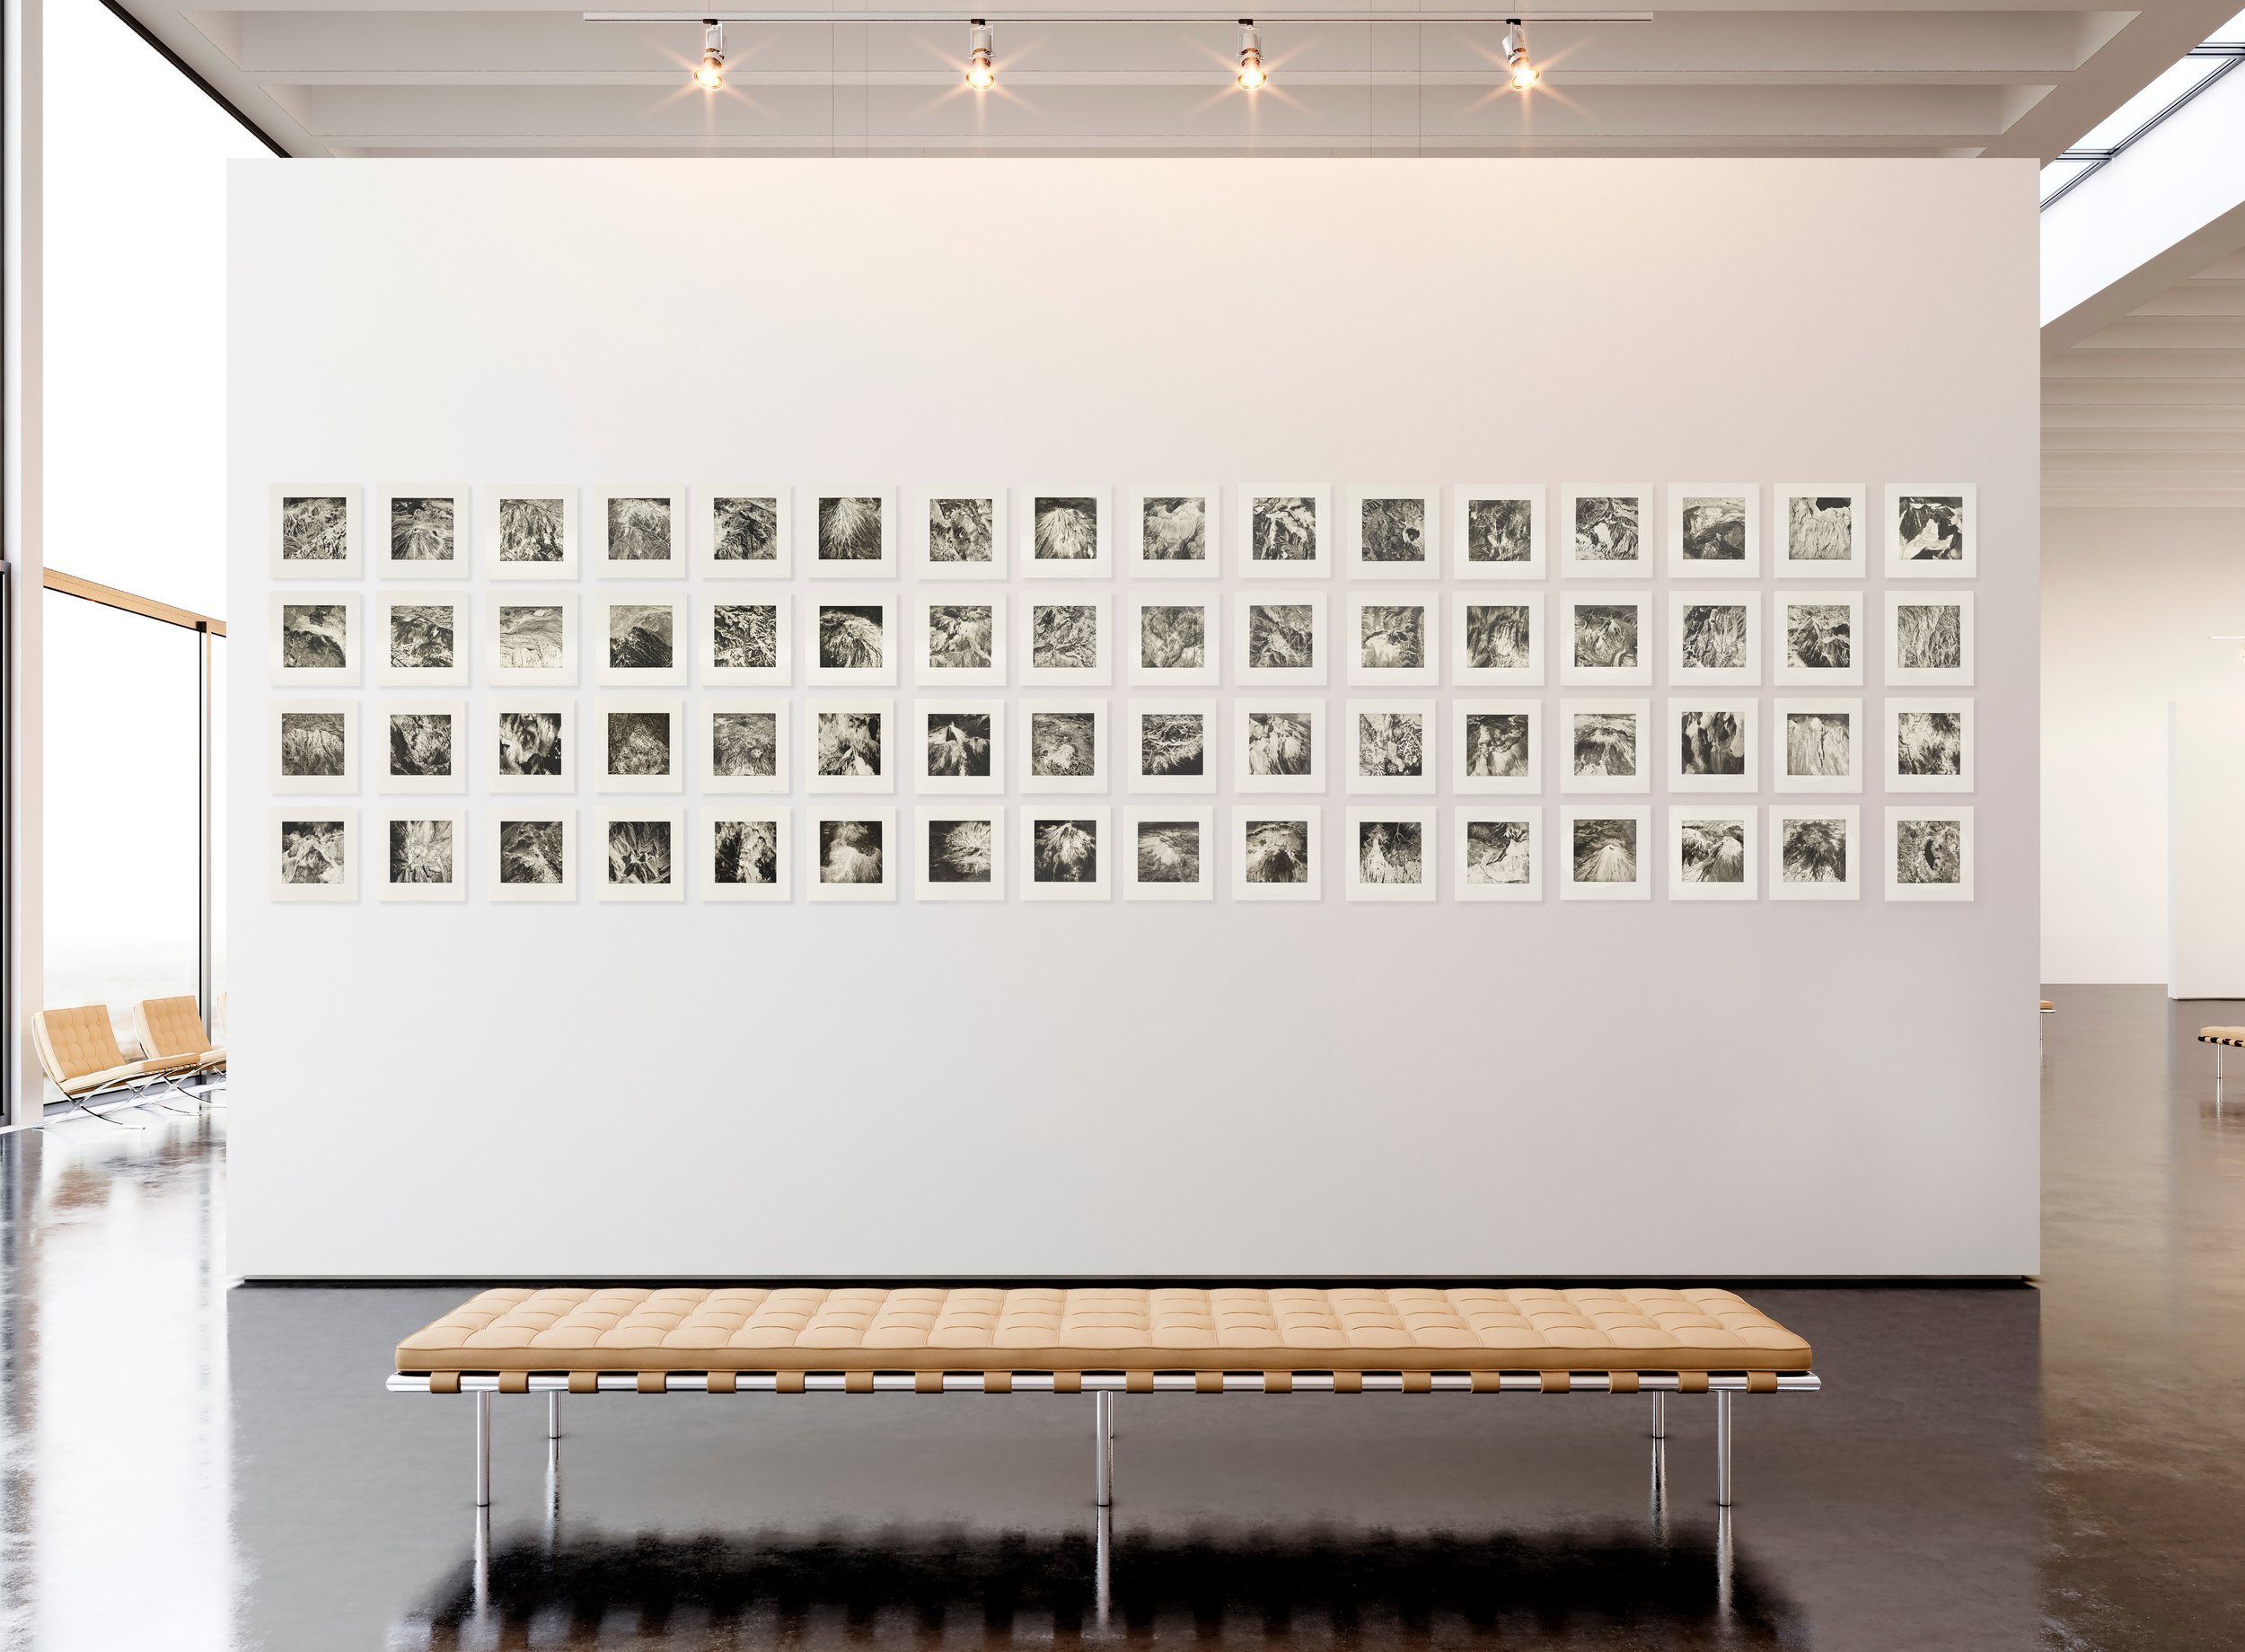    Axis Mundi Gravure Grid, 2022   Overall installation: 264” x 68”, 64 - Copperplate photogravure etchings on cotton rag paper. Each print; plate size 10.6” x 10.6”, paper size, 16” x 15.5” 